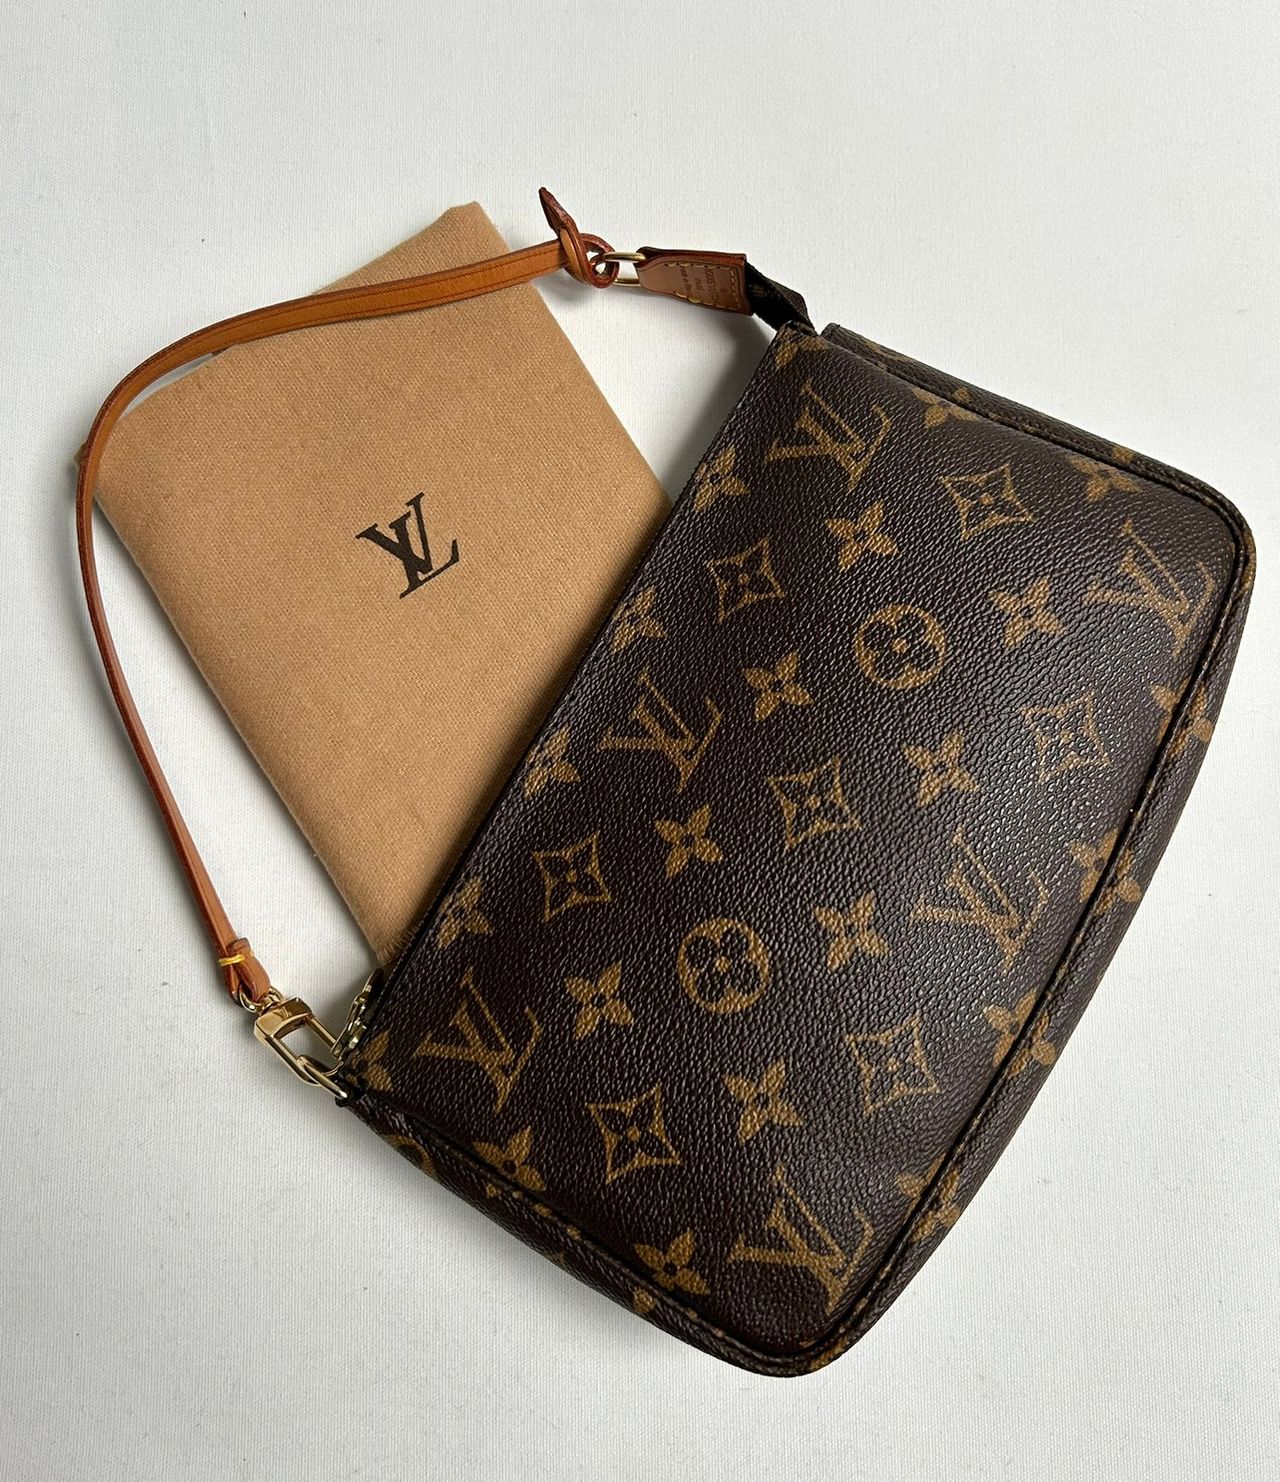 LouisVuitton #Pochette Accesoire Old vs New - New Version has the following  updates: 1. Longer strap 2. Slightly larger …